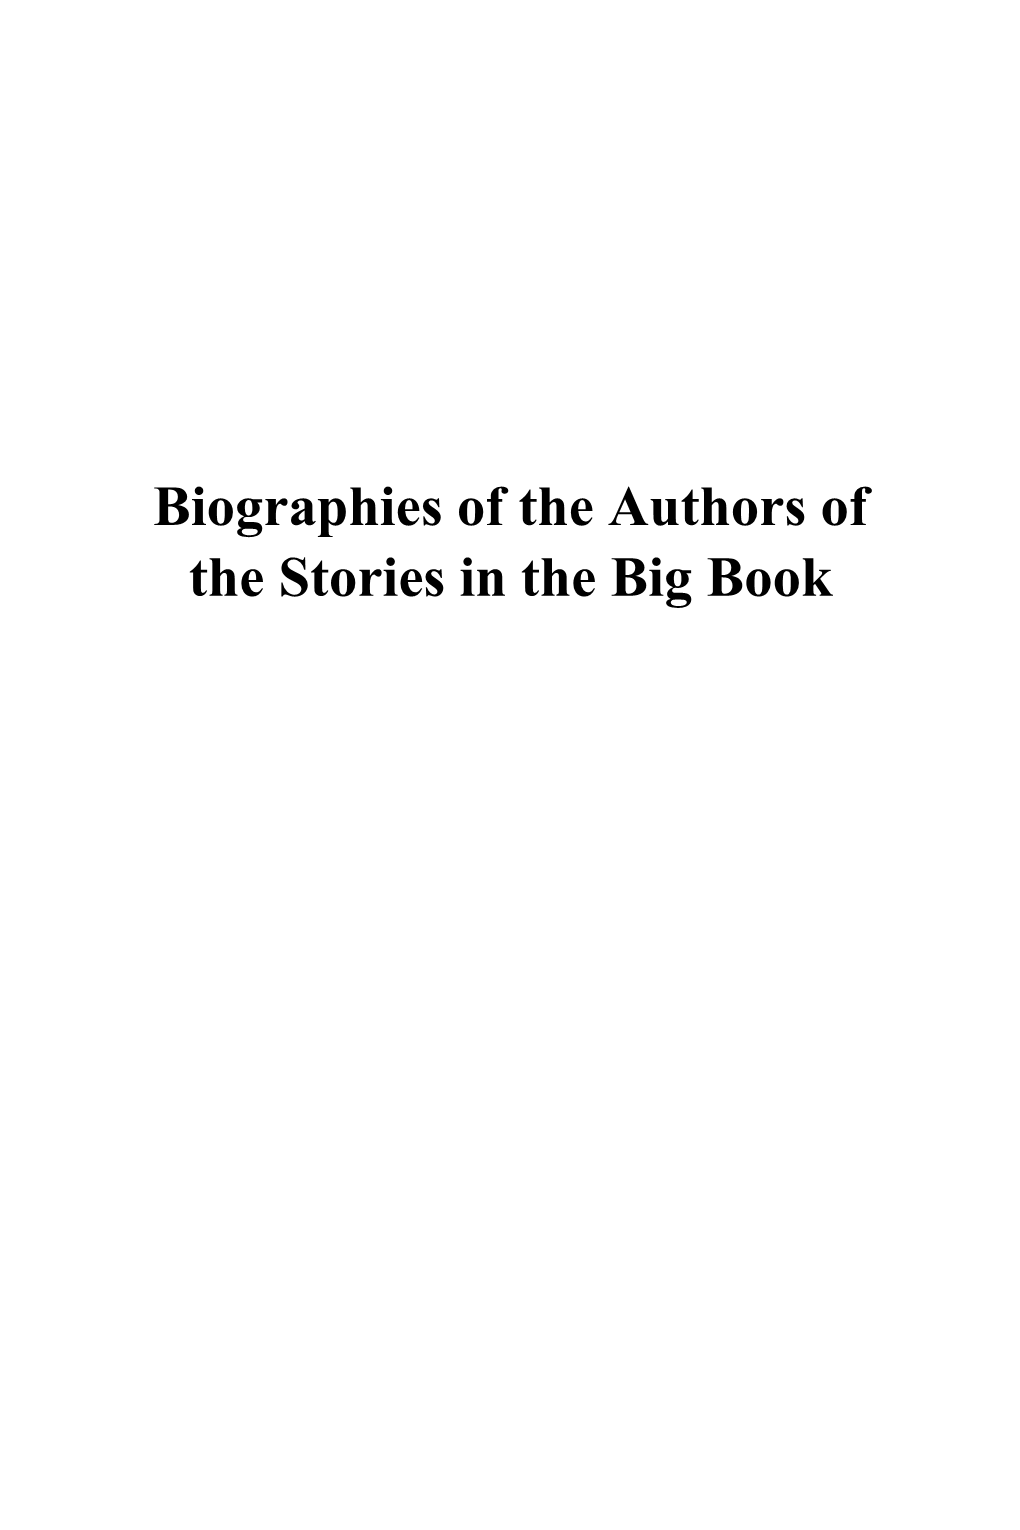 Biographies of the Authors of the Stories in the Big Book